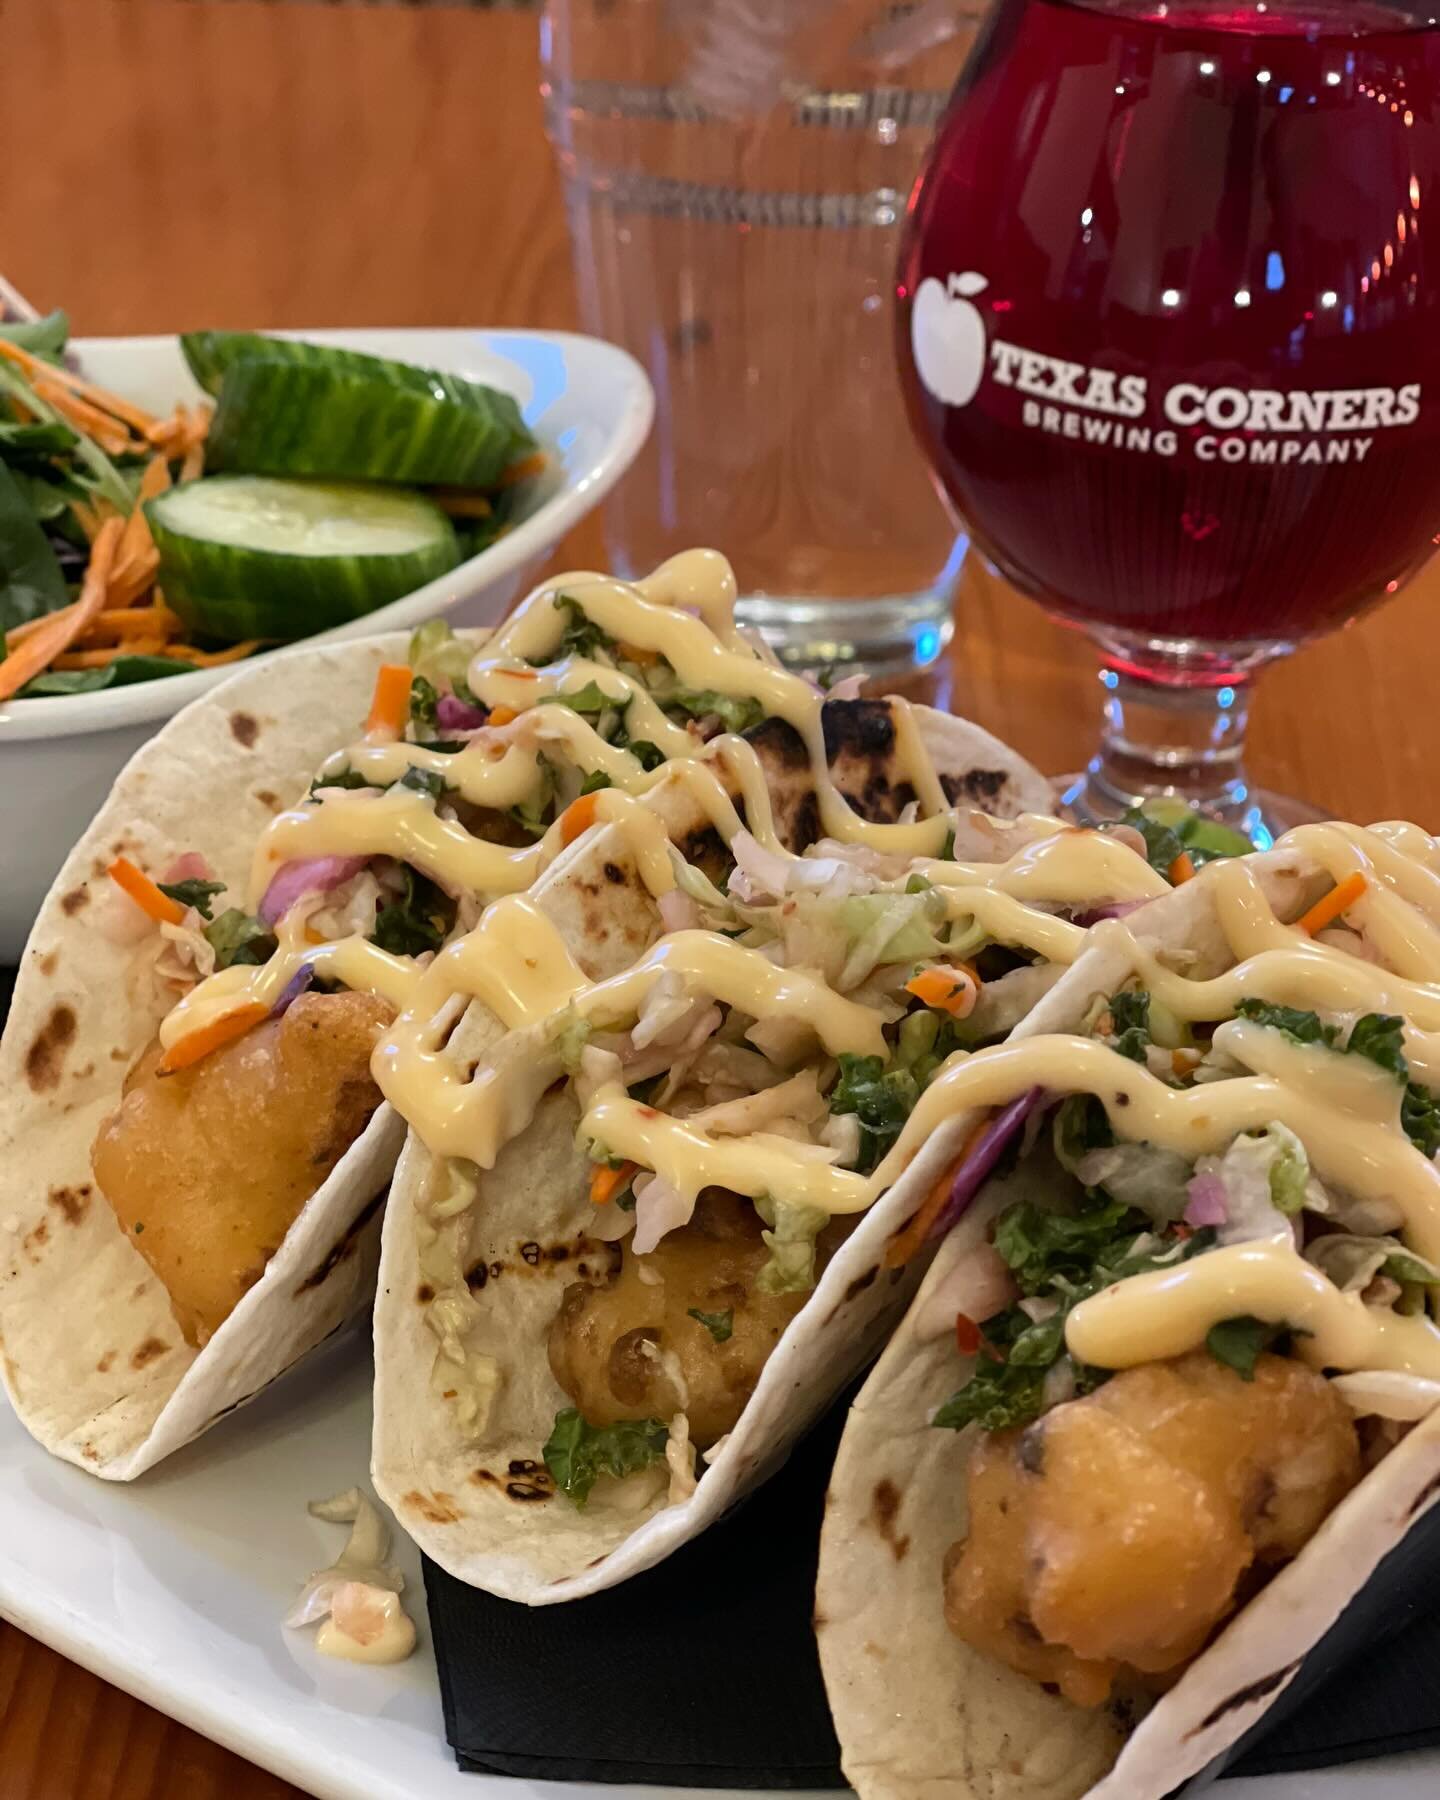 It&rsquo;s cauliflower week here at TCBC! We&rsquo;ve got loads of locally grown cauliflower and we&rsquo;re featuring it heavily all week. 

Fried Cauliflower Tacos - (3) flour tortillas, fried cauliflower, Thai slaw, sweet chili aioli, choice of si